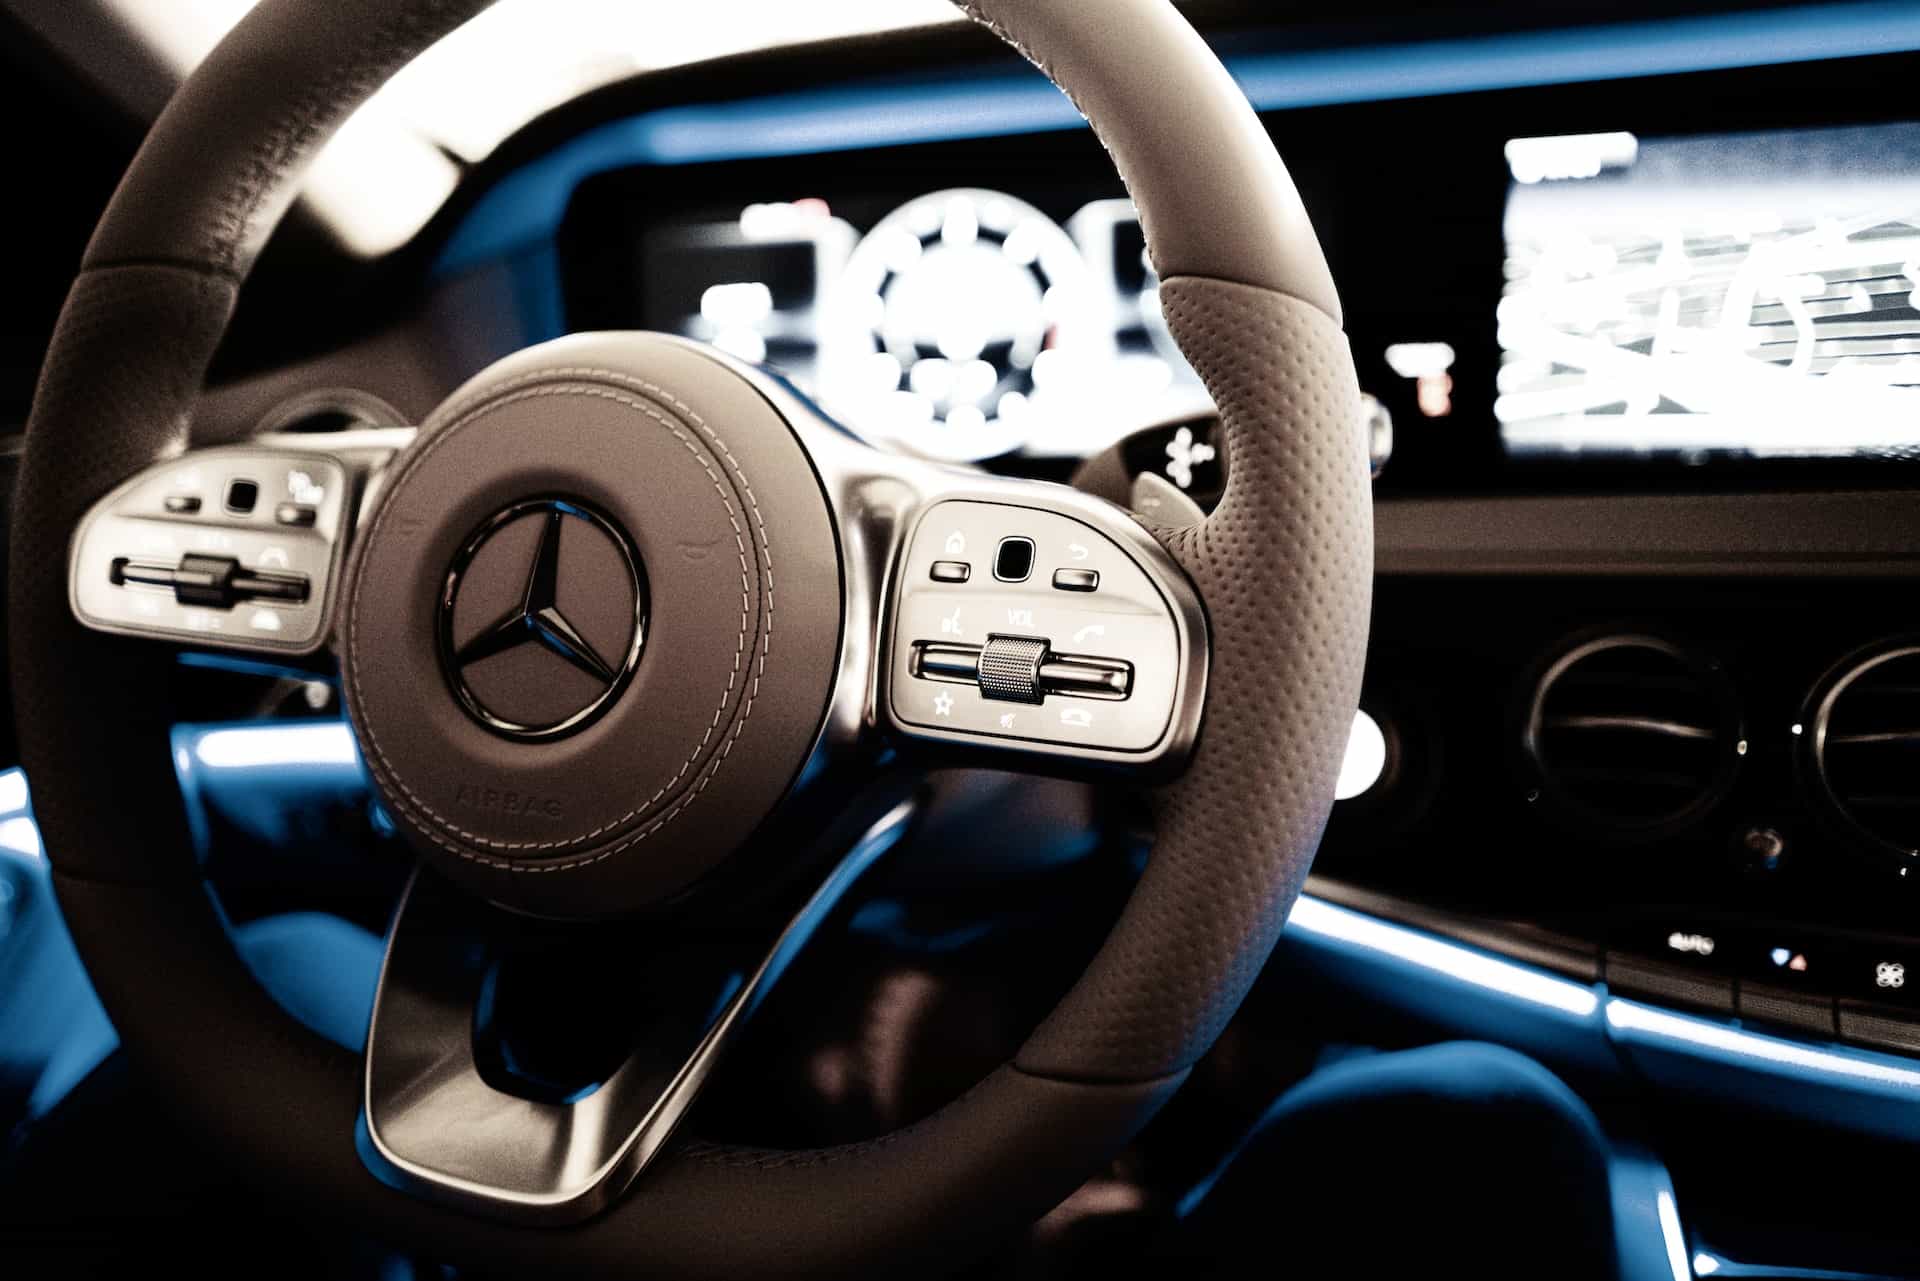 Which Mercedes Models Have A Heated Steering Wheel?